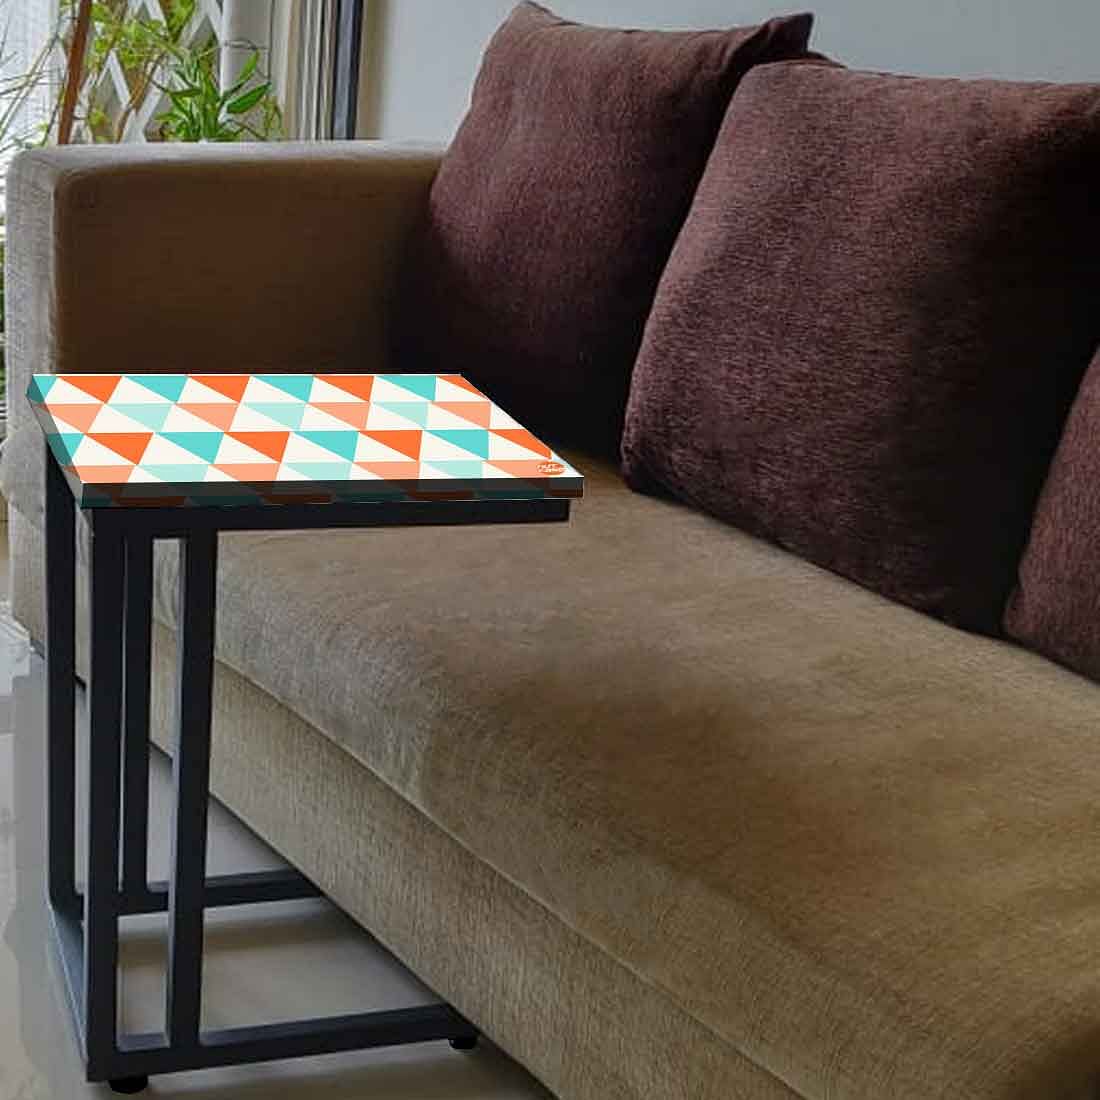 Latest Modern C Side Table - Orange and Mint Triangles Nutcase